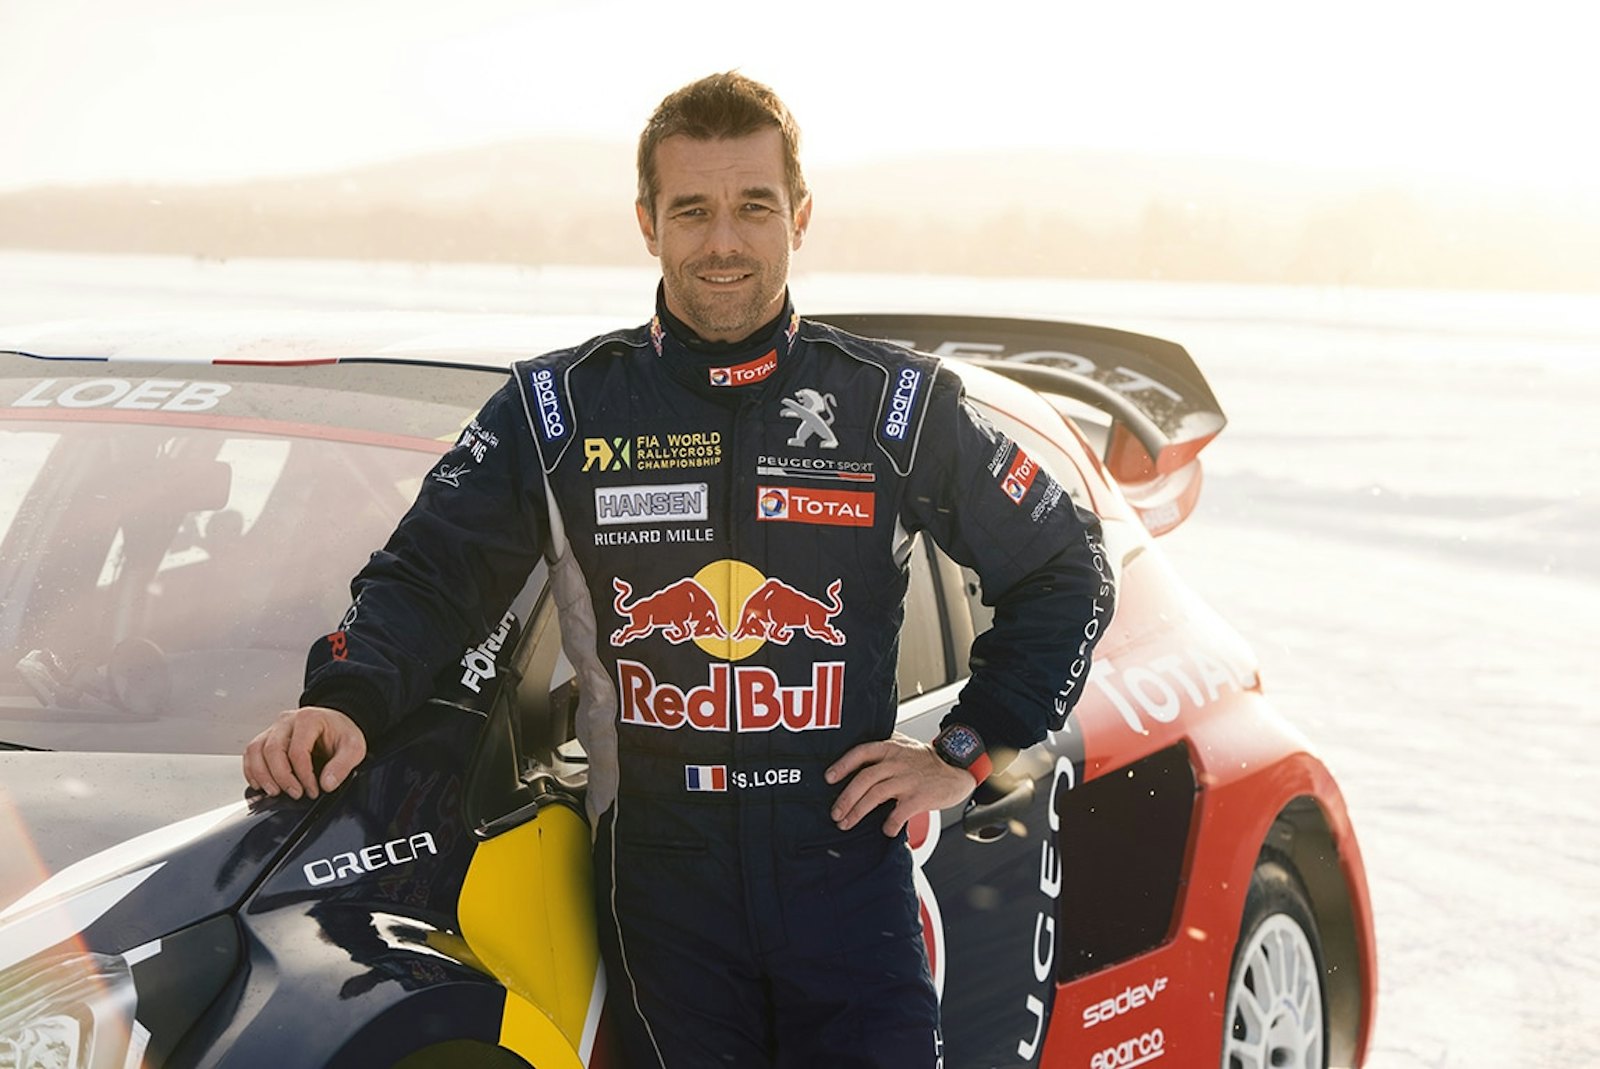 Sebastien Loeb poses for a portrait during the Rallycross on Ice project in Are, Sweden on February 16, 2016 // Oskar Bakke/Red Bull Content Pool // P-20160226-00312 // Usage for editorial use only // Please go to www.redbullcontentpool.com for further information. //